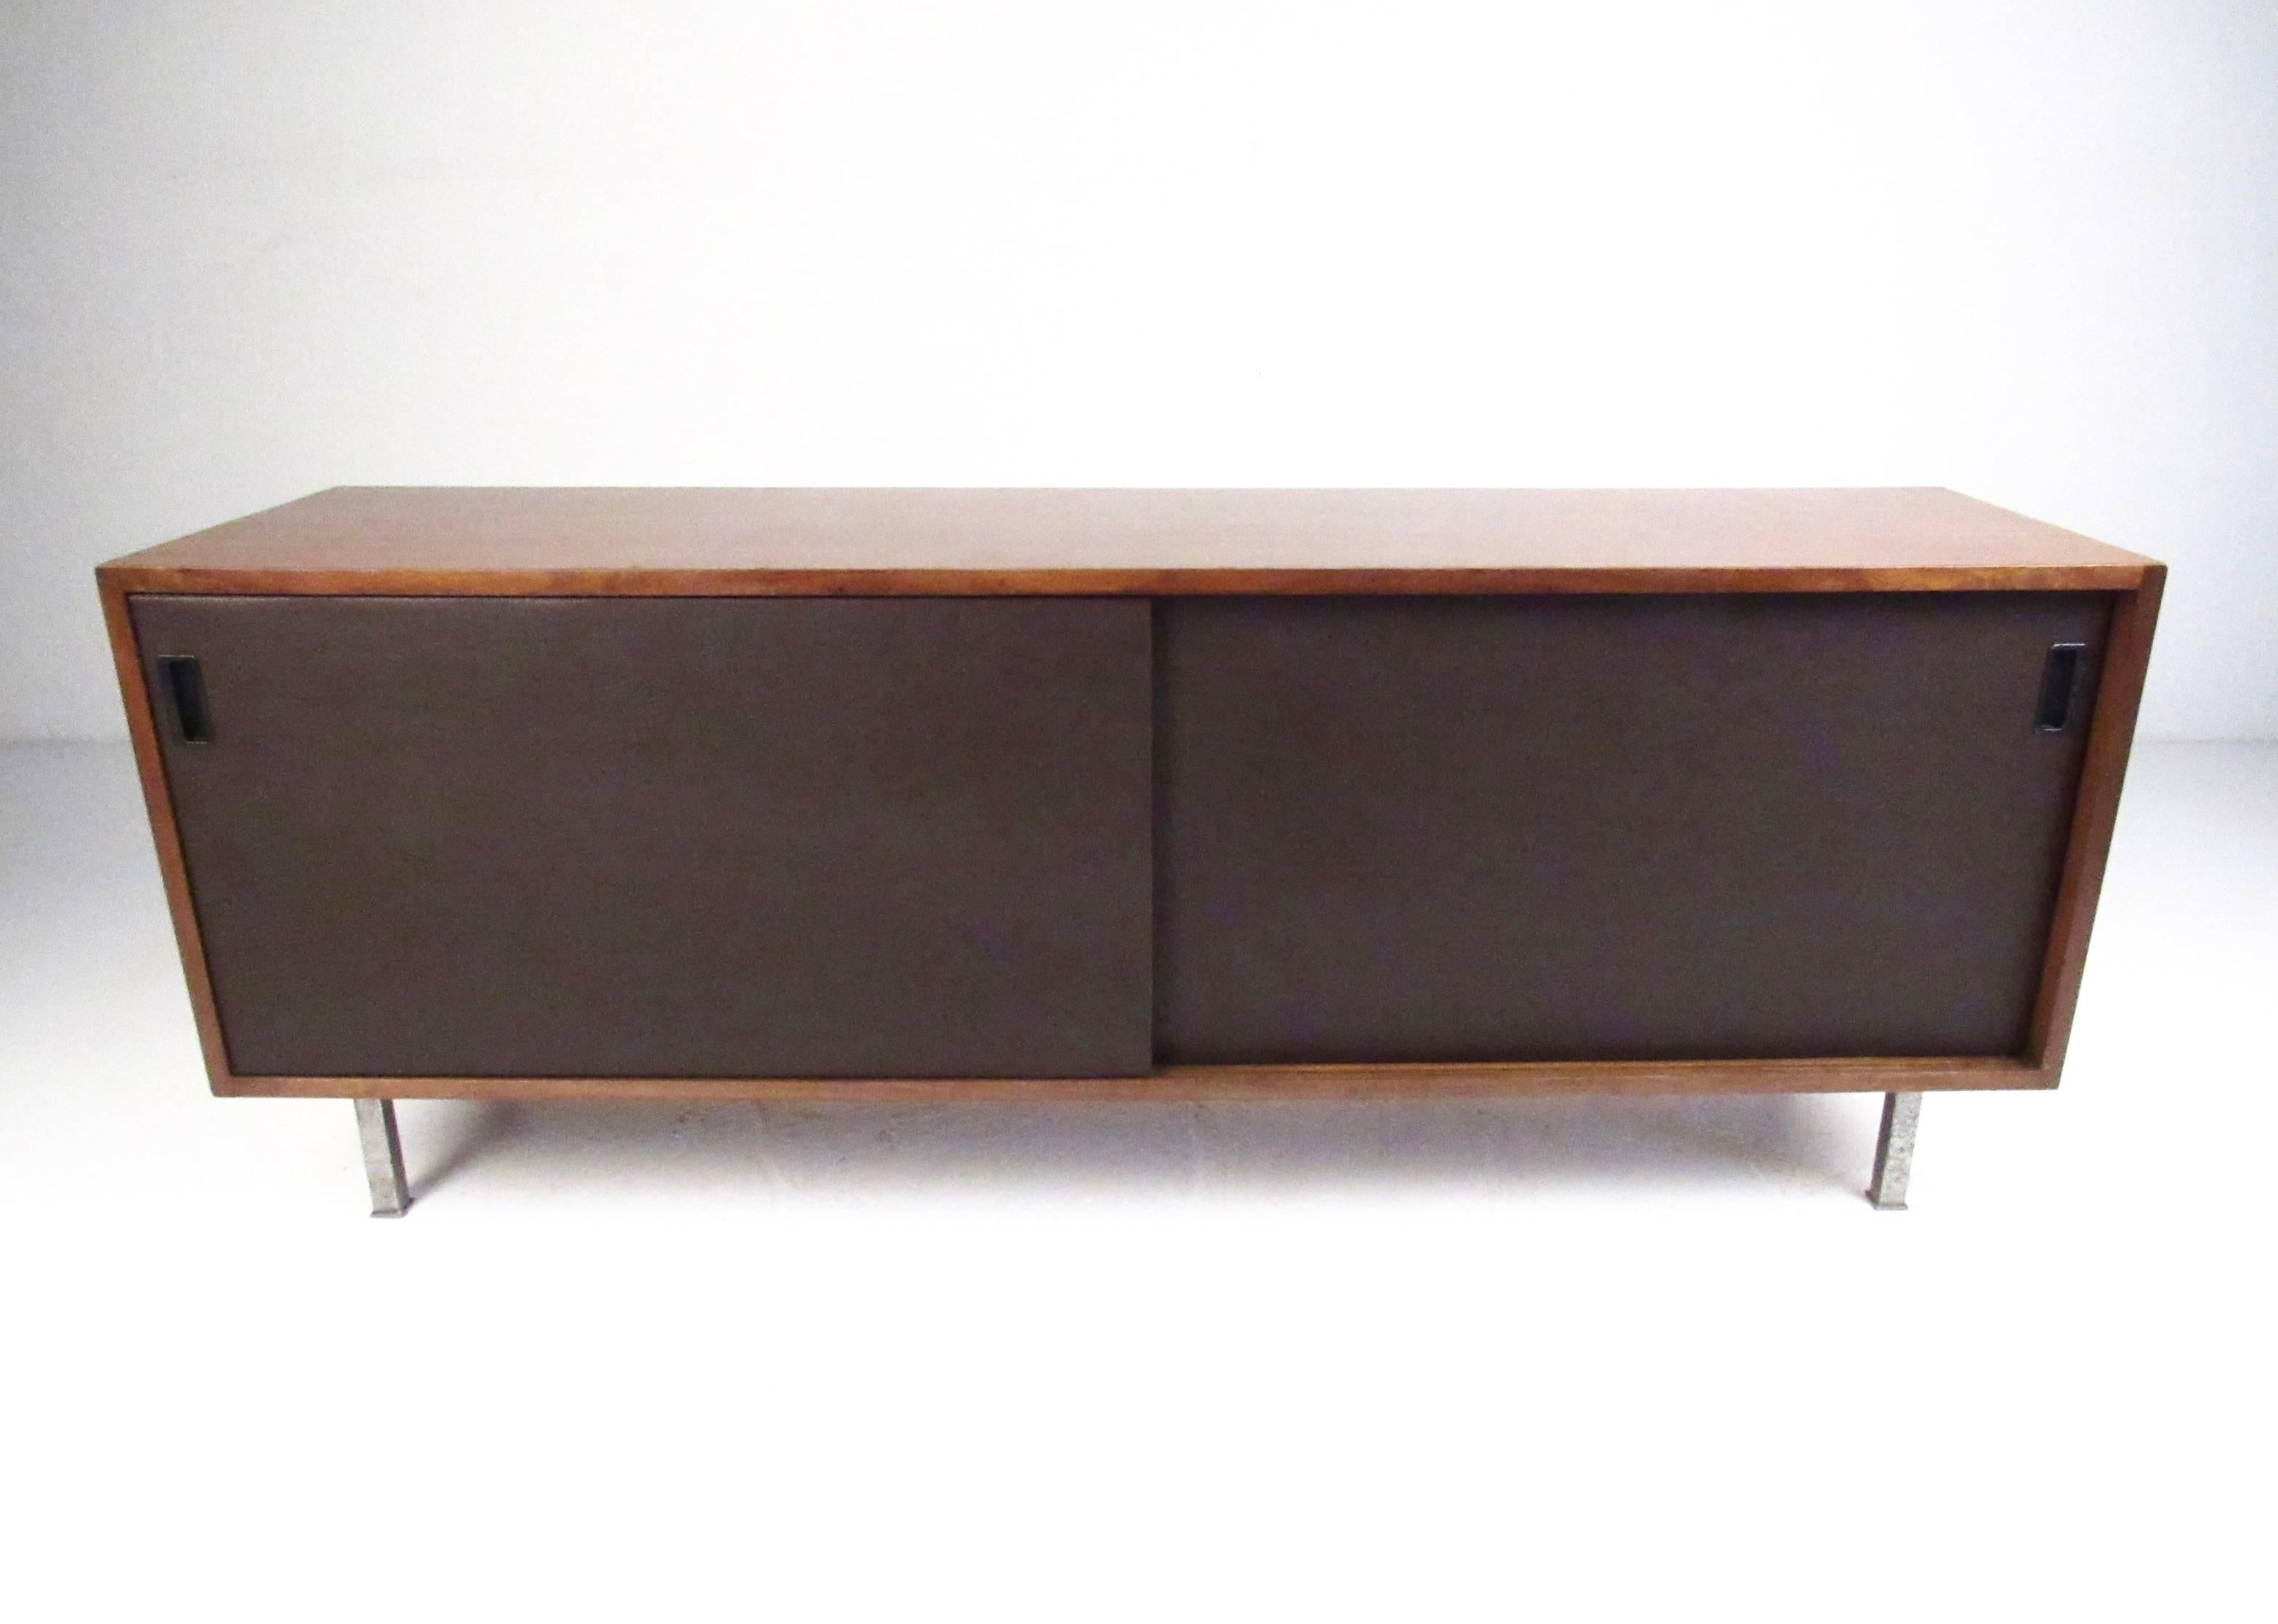 This unique Mid-Century cabinet features spacious sliding door storage and sleek modern design. Iconic design by Florence Knoll, this spacious console cabinet is ideal for use as a television stand, office storage, or for dining room use. Steel